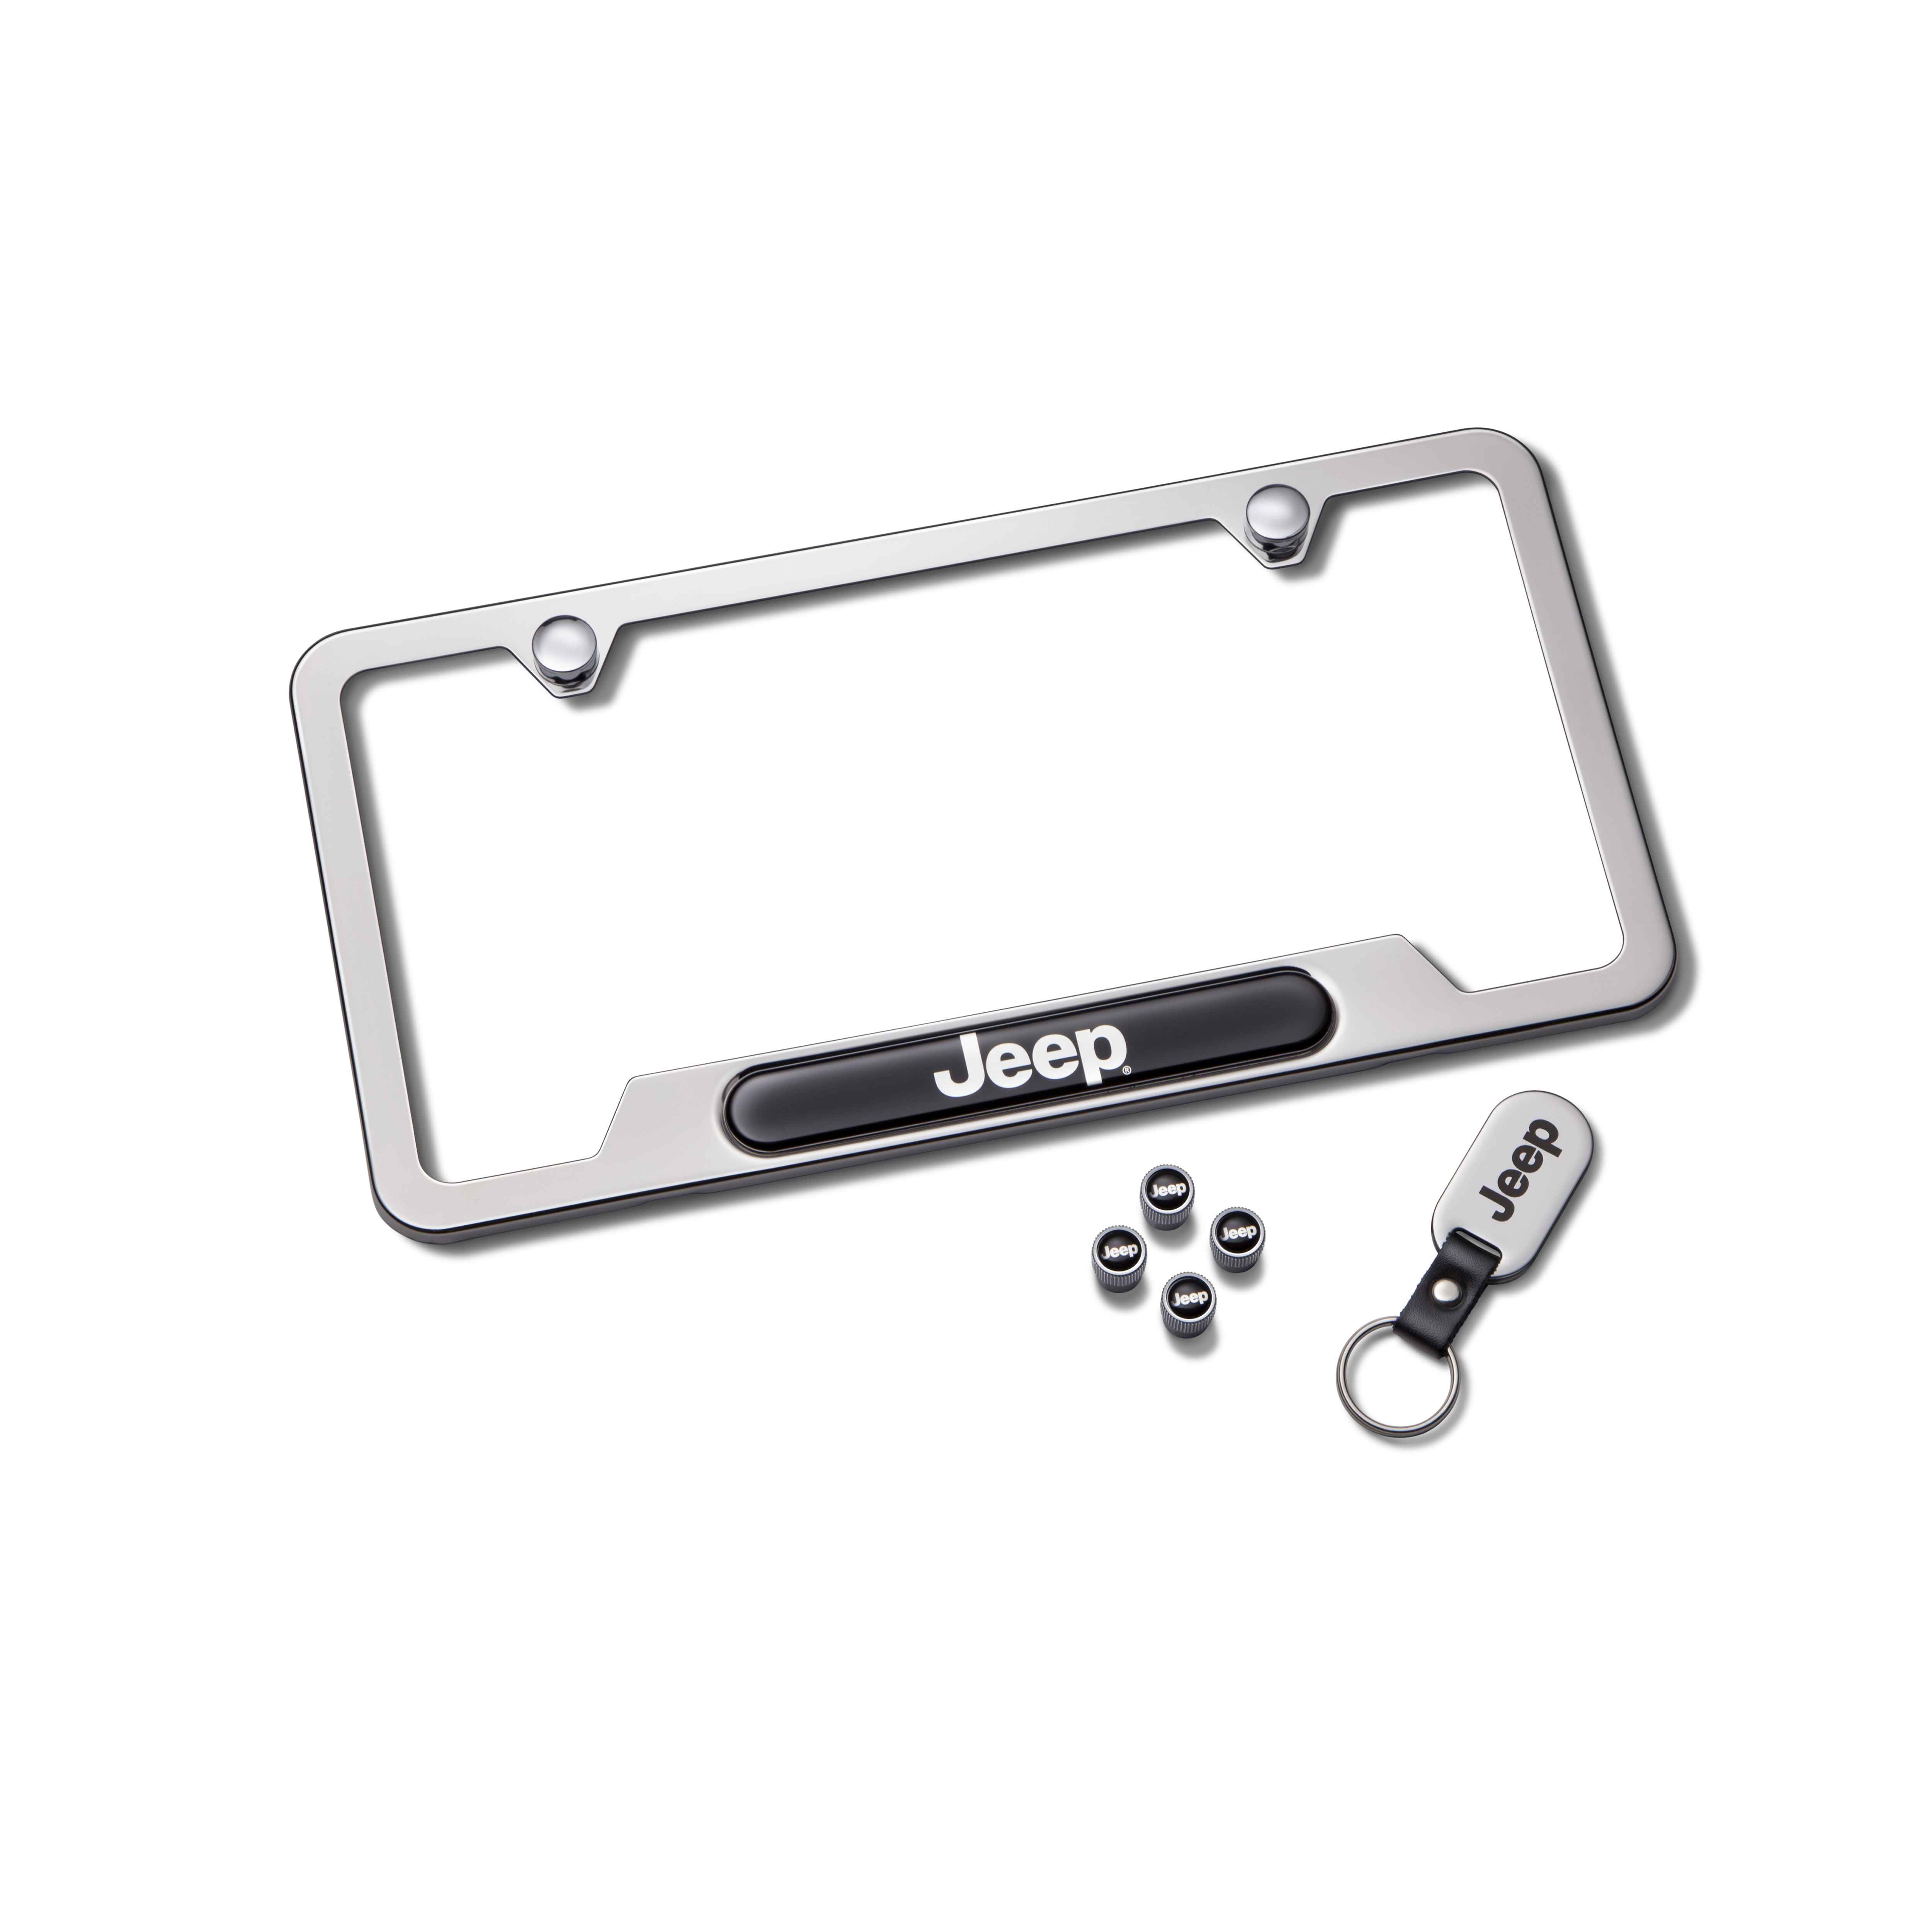 OEM 2020 Jeep Grand Cherokee License Plate Frame Gift Set (Part #82215852)